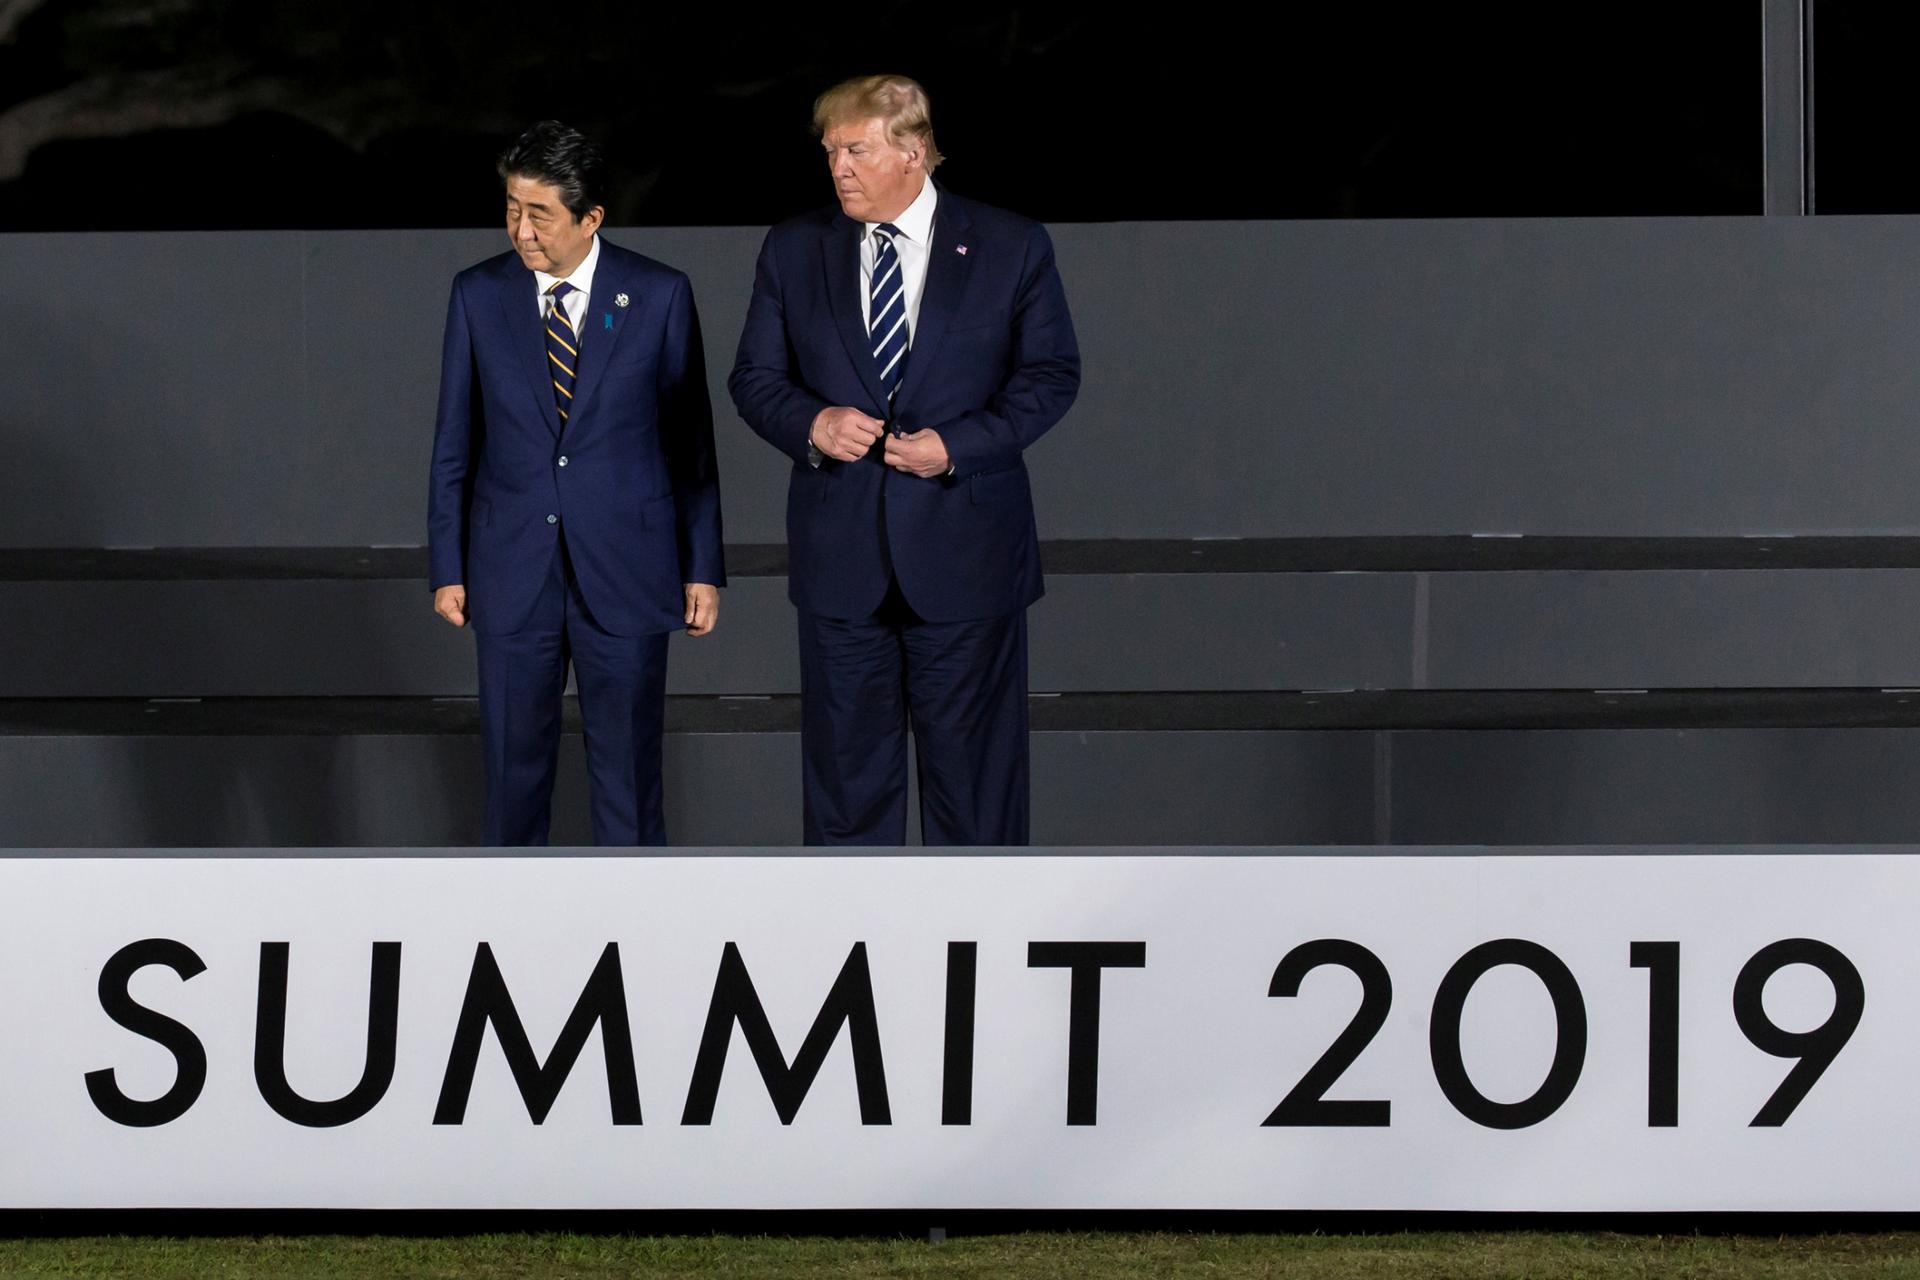 US President Donald Trump stands with Japanese Prime Minister Shinzō Abe above a sign that says Summit 2019